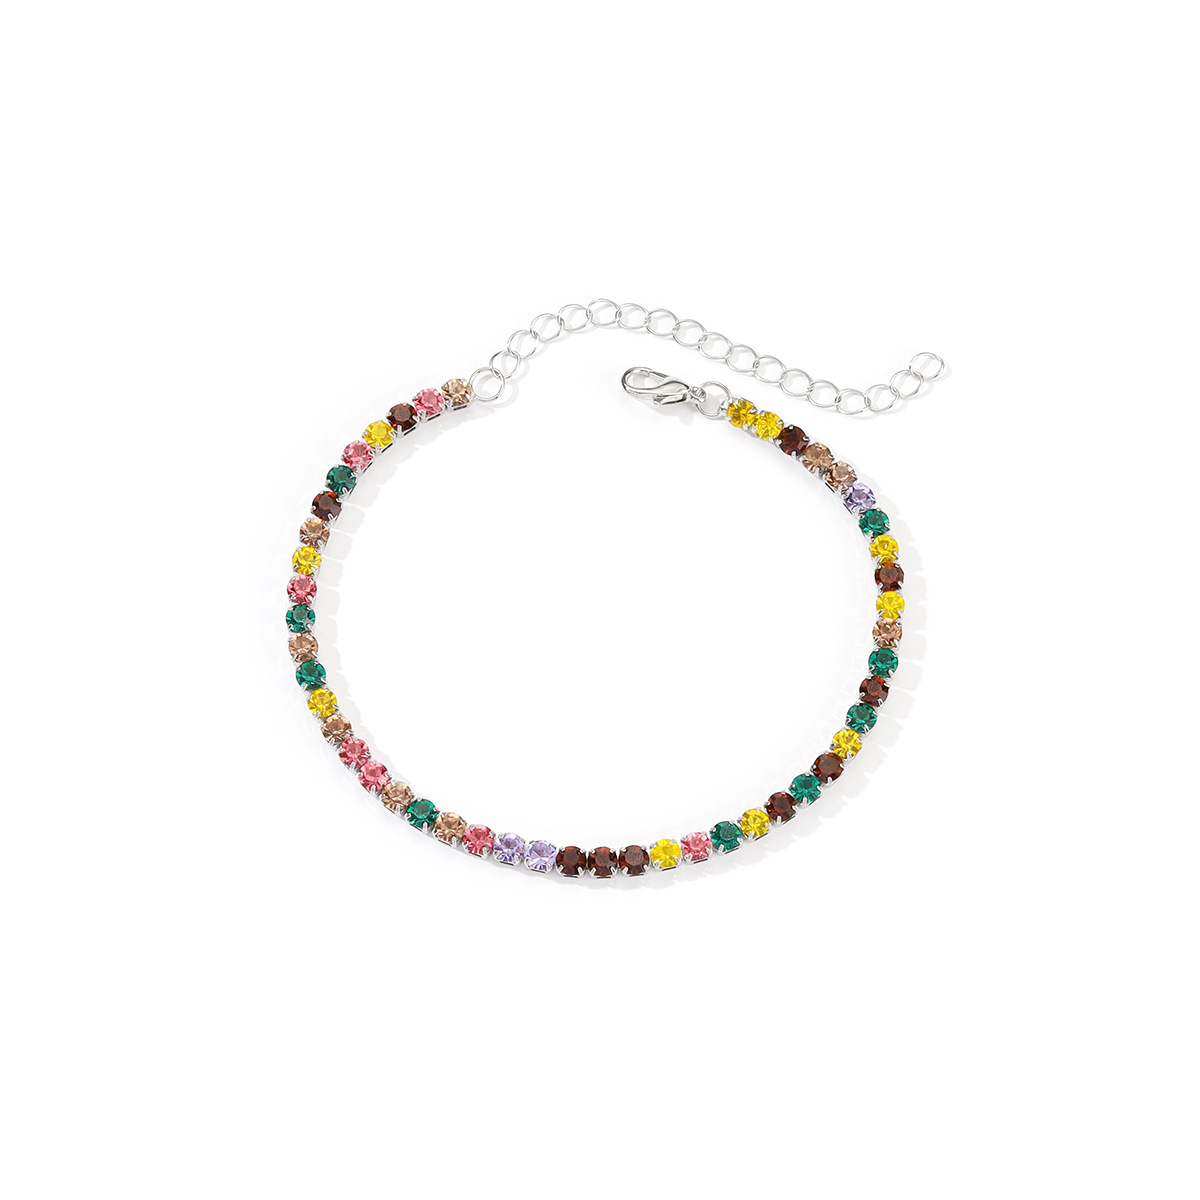 10:Colorful silver anklet